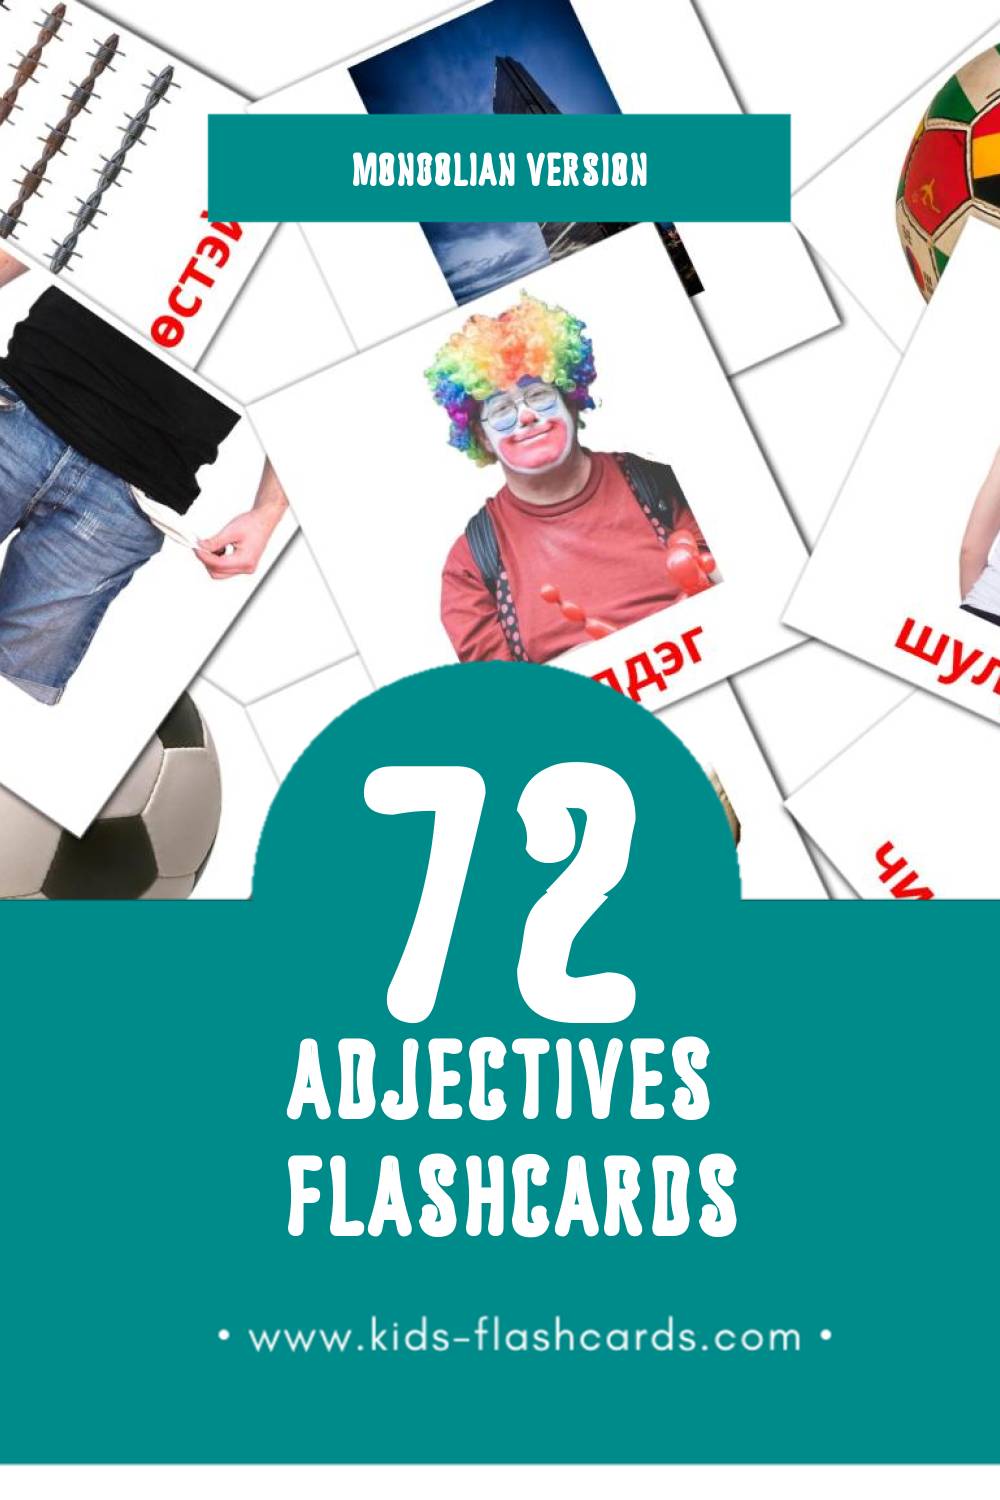 Visual нэр үг Flashcards for Toddlers (74 cards in Mongolian)